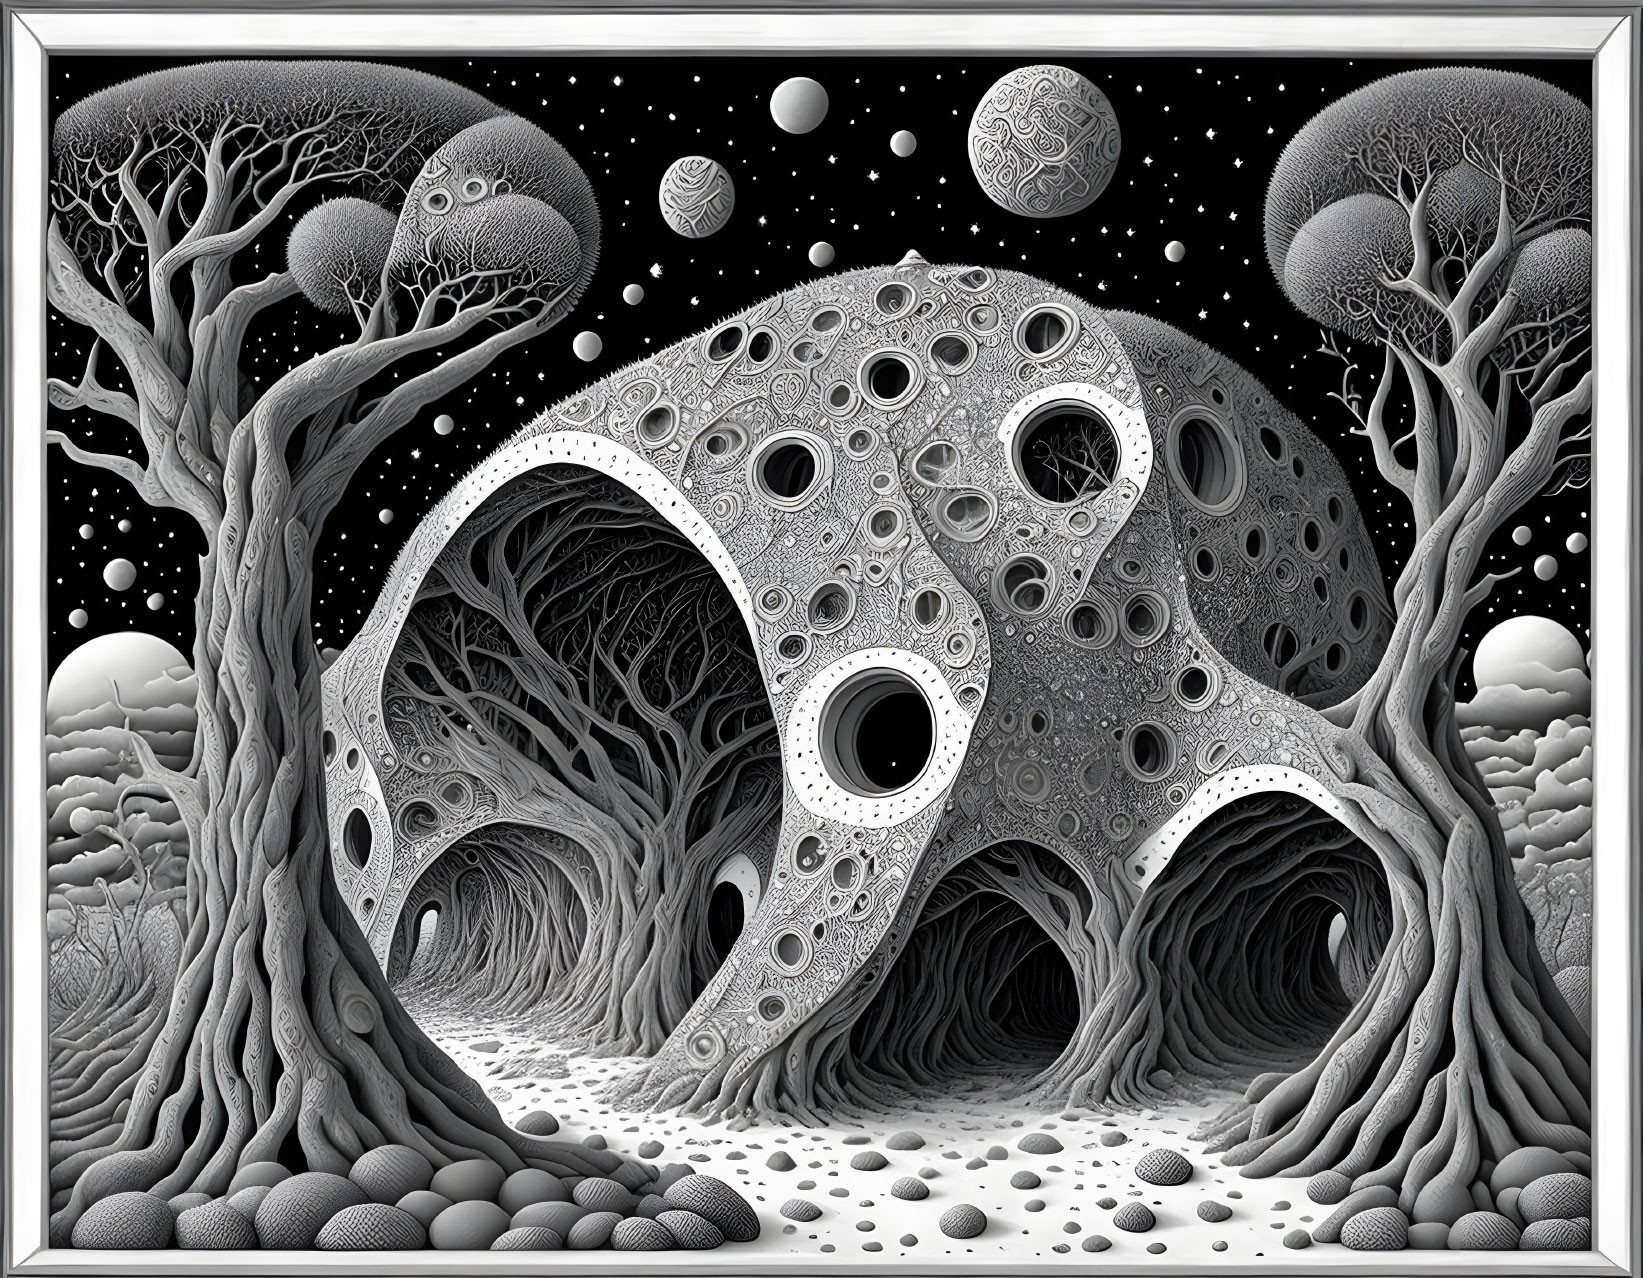 Monochrome surreal illustration of fantastical landscape with cratered structures and spherical entities and peculiar trees.